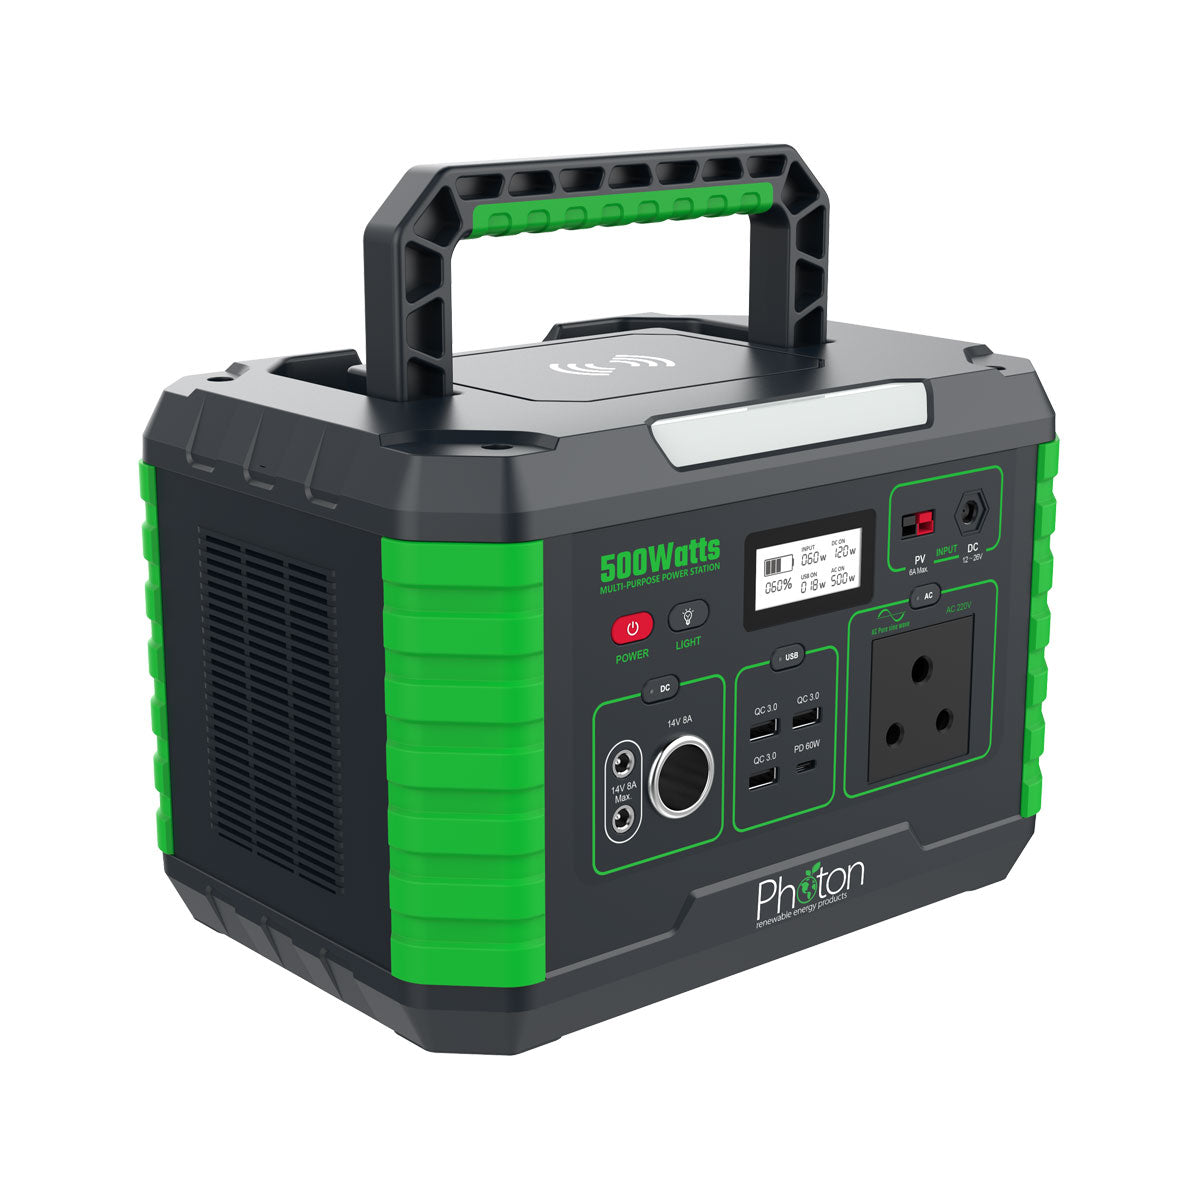 Photon Portable Power Station with 500W Inverter Built in | Charge by Wall/Car/Solar 3 USB & Car Lighter plug